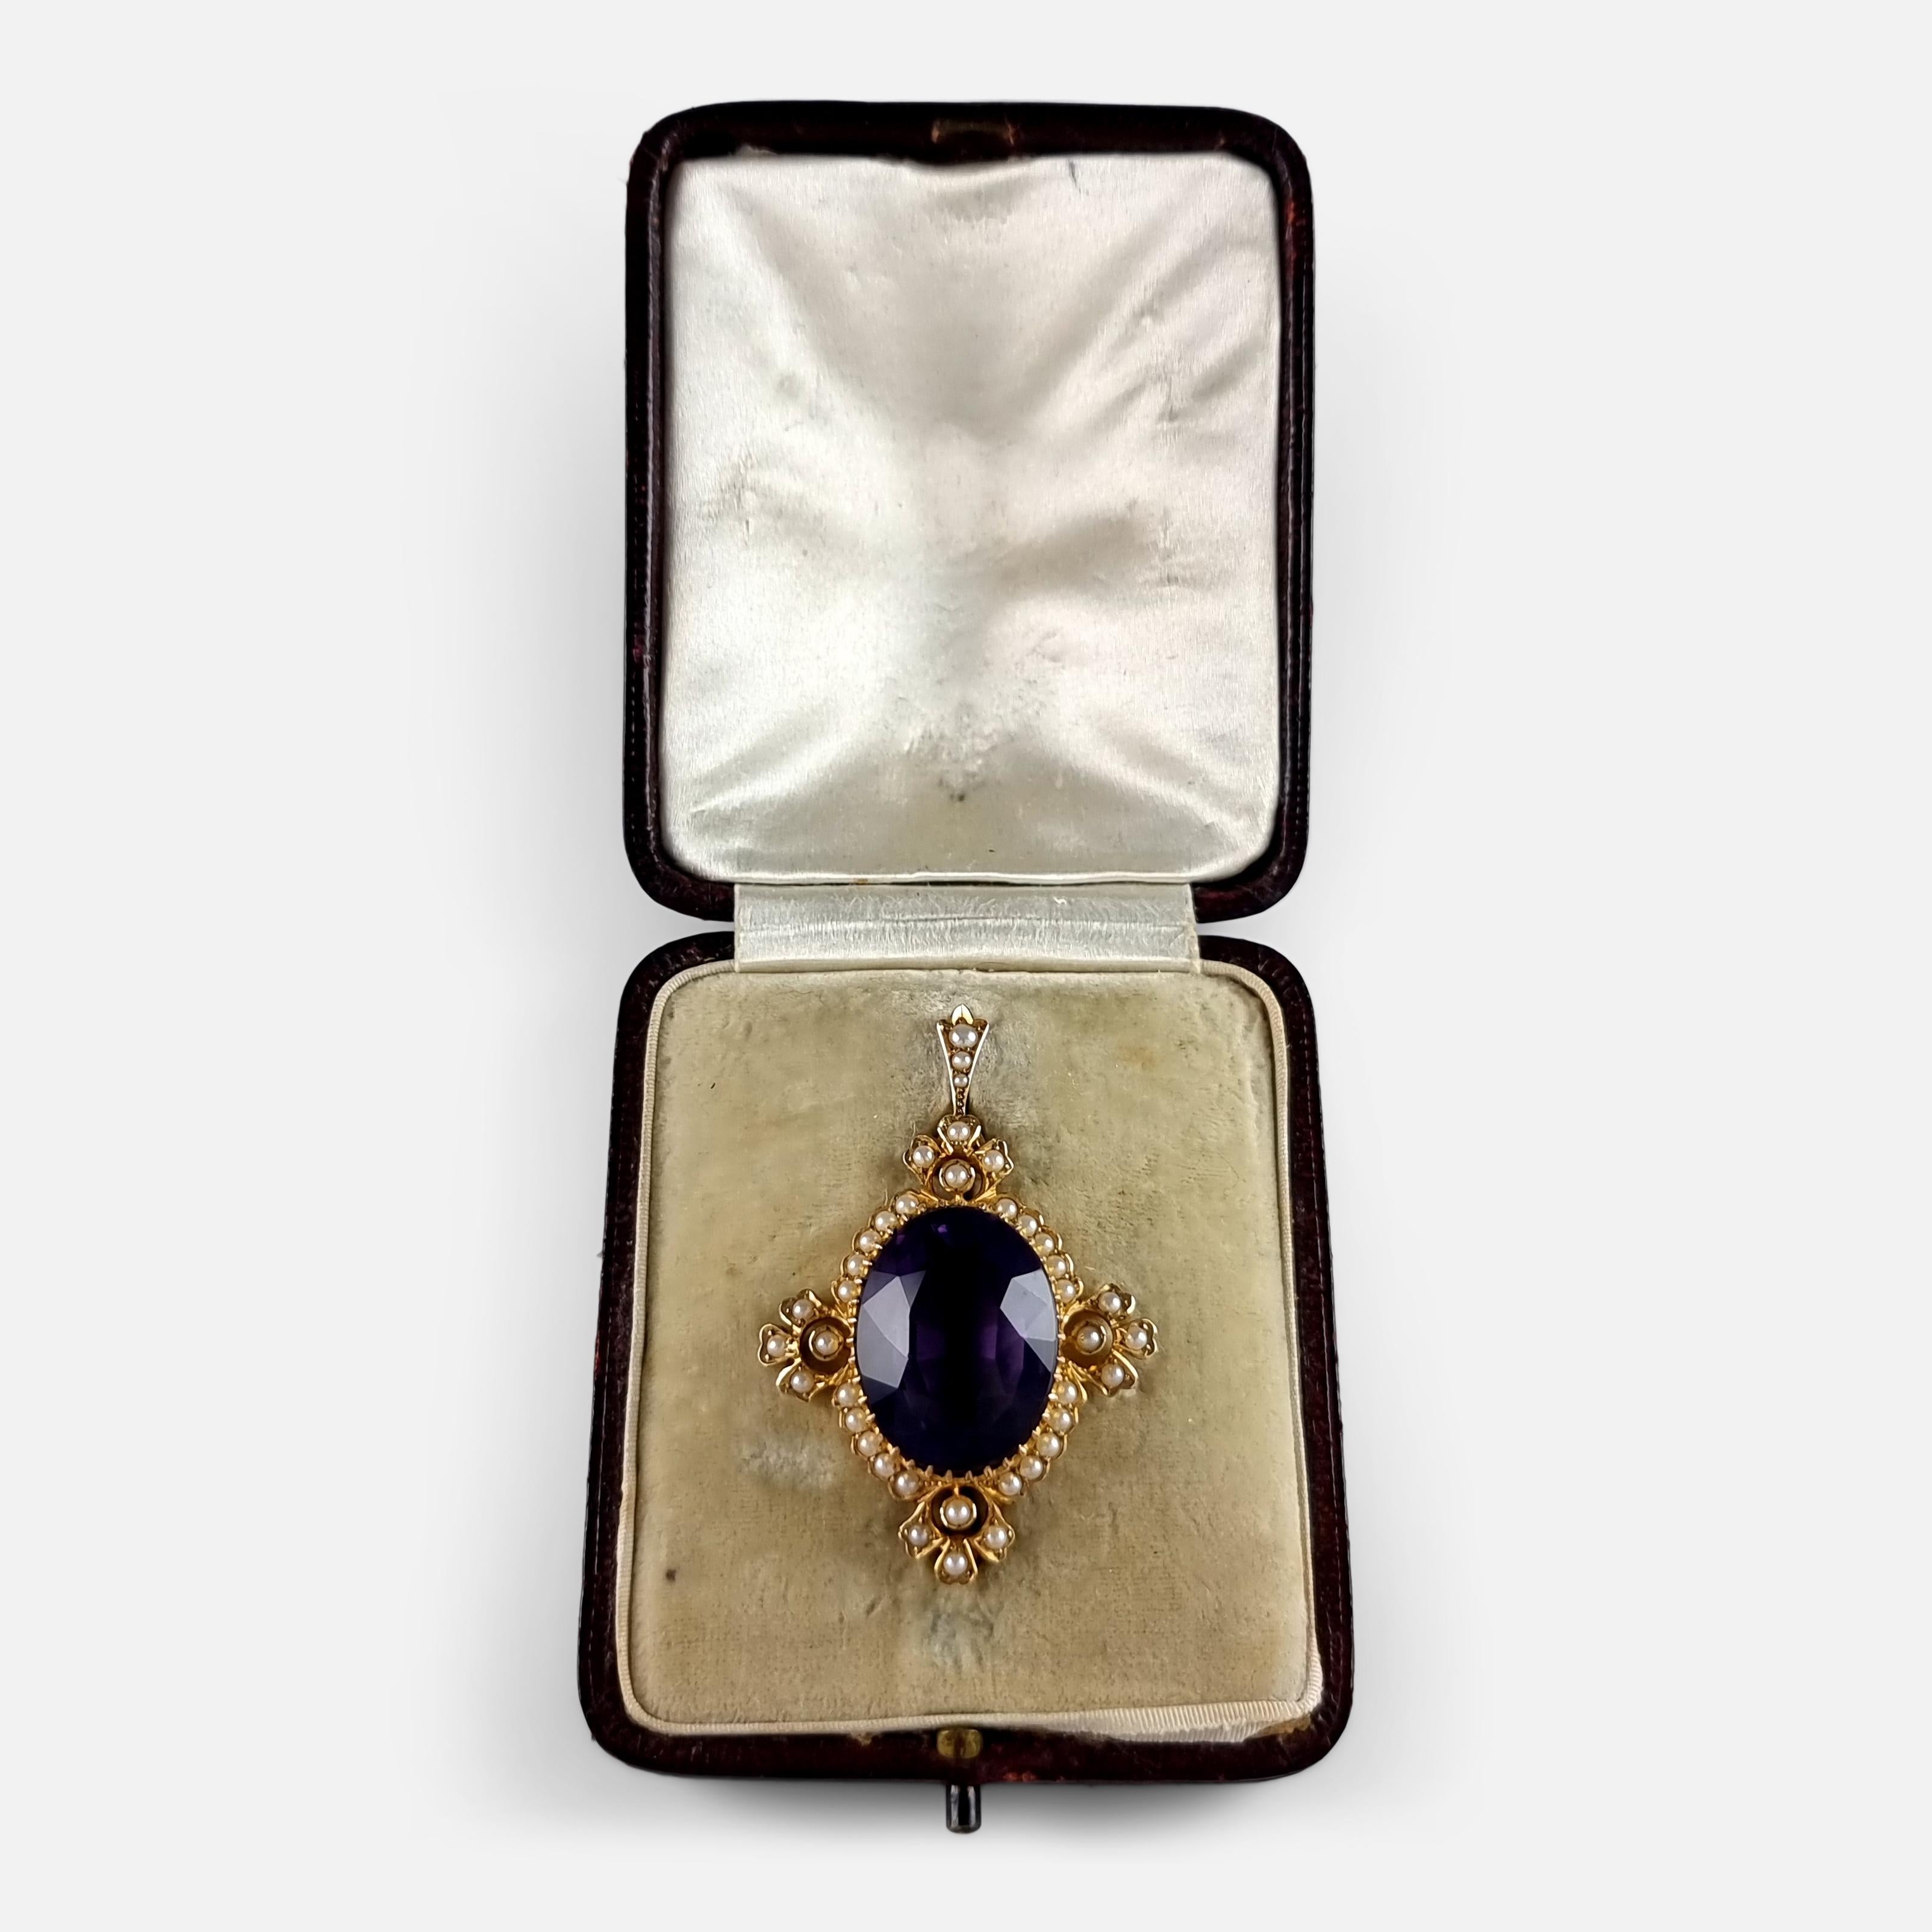 Oval Cut Edwardian 15ct Gold Amethyst and Seed Pearl Pendant Brooch